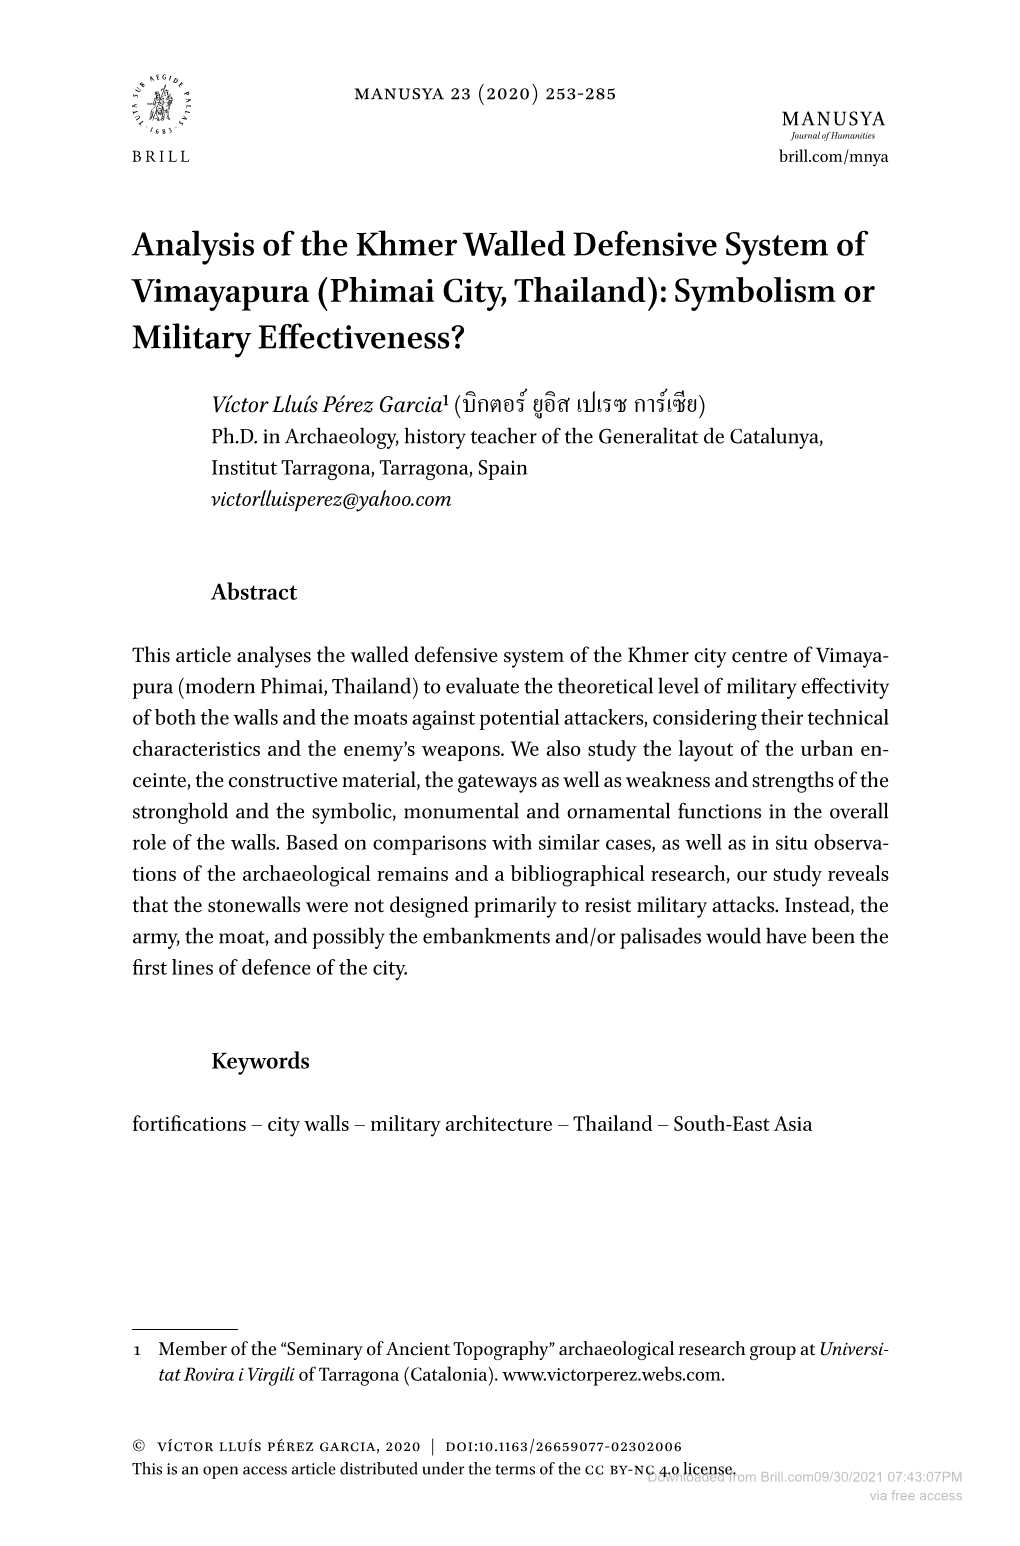 Analysis of the Khmer Walled Defensive System of Vimayapura (Phimai City, Thailand): Symbolism Or Military Effectiveness?